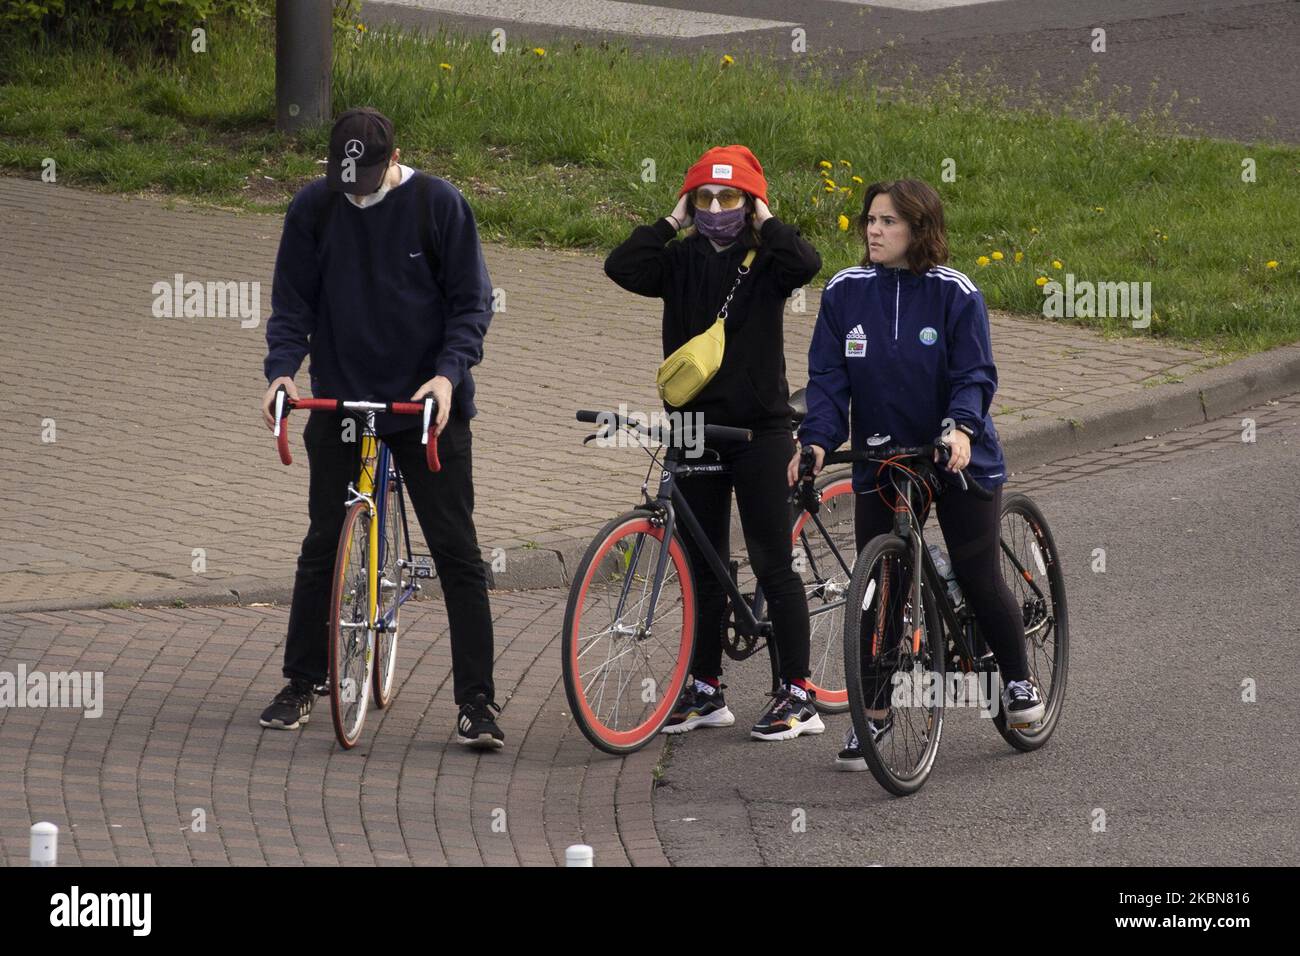 Cyclists, some wearing masks are seen in Warsaw, Poland on May 2, 2020. The Polish government has announced it will allow the opening of shopping malls on May 4 and pre-schools on May 6 less than two weeks ahead of scheduled persidential elections despite strong opposition. (Photo by Jaap Arriens/NurPhoto) Stock Photo